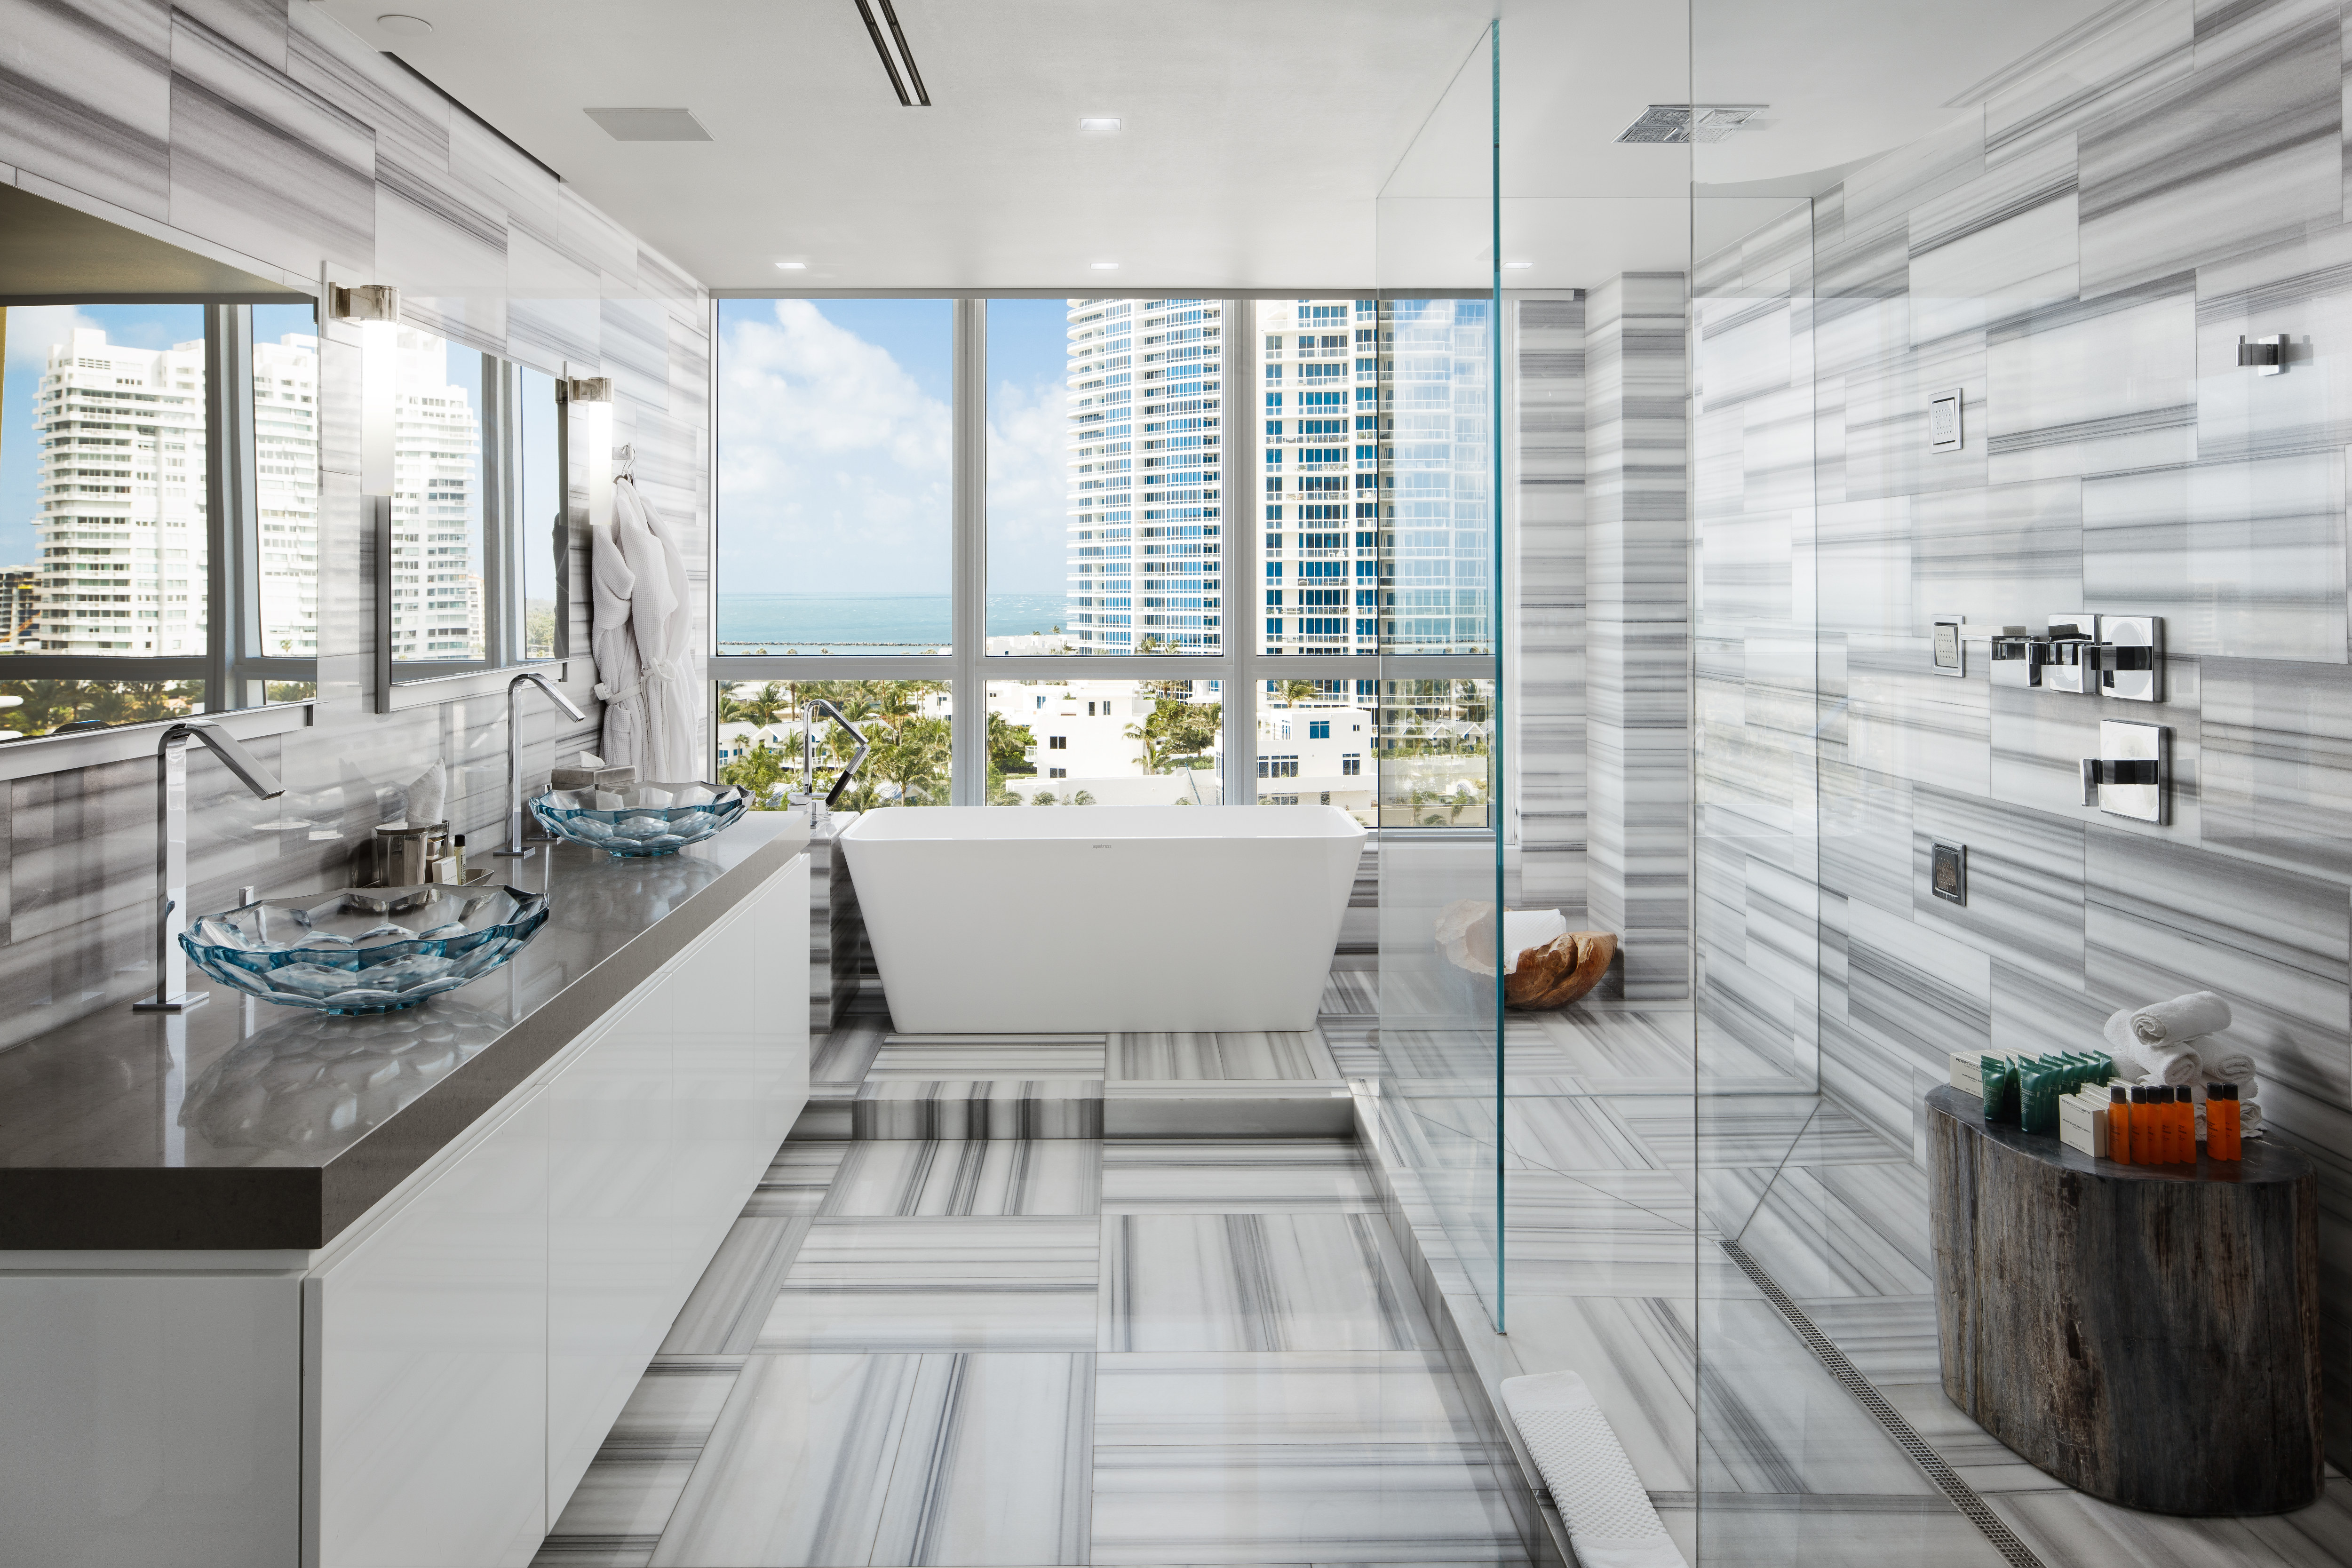 Penthouse bathroom with dual vanity area bathtub and large windows with city view